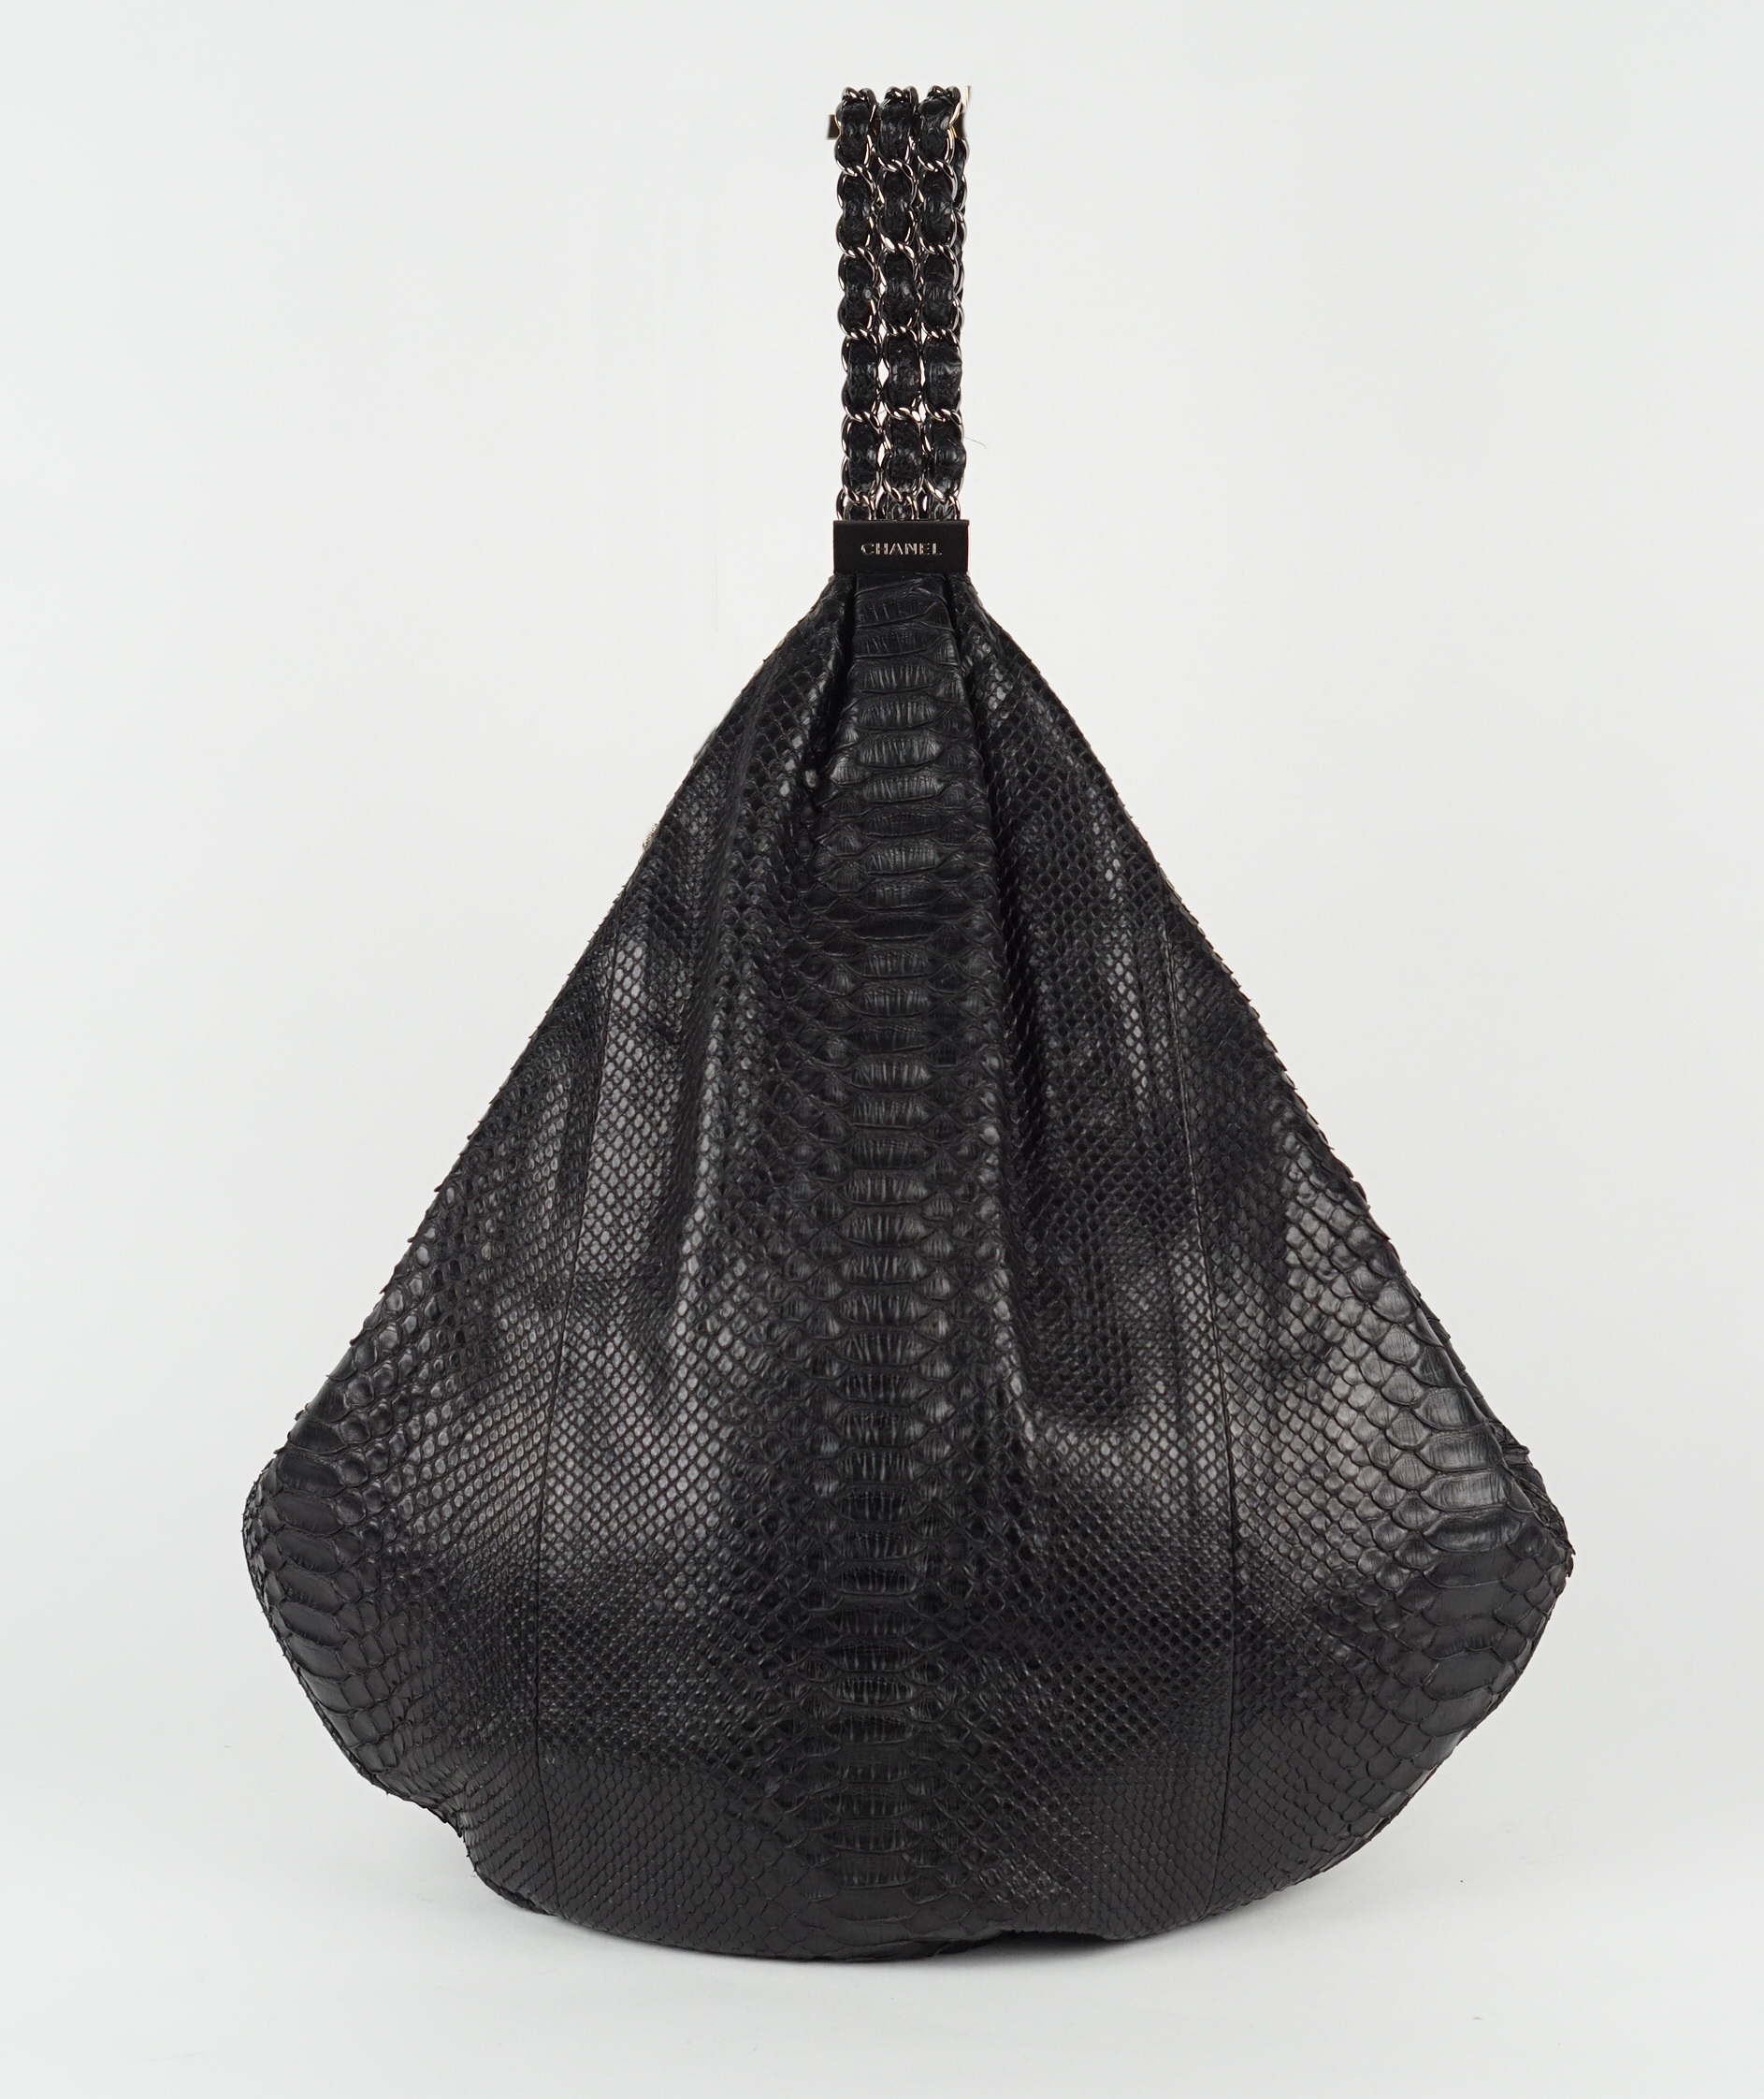 SCHULTERTASCHE - LIMITED EDITION - ROCK + CHAIN HOBO